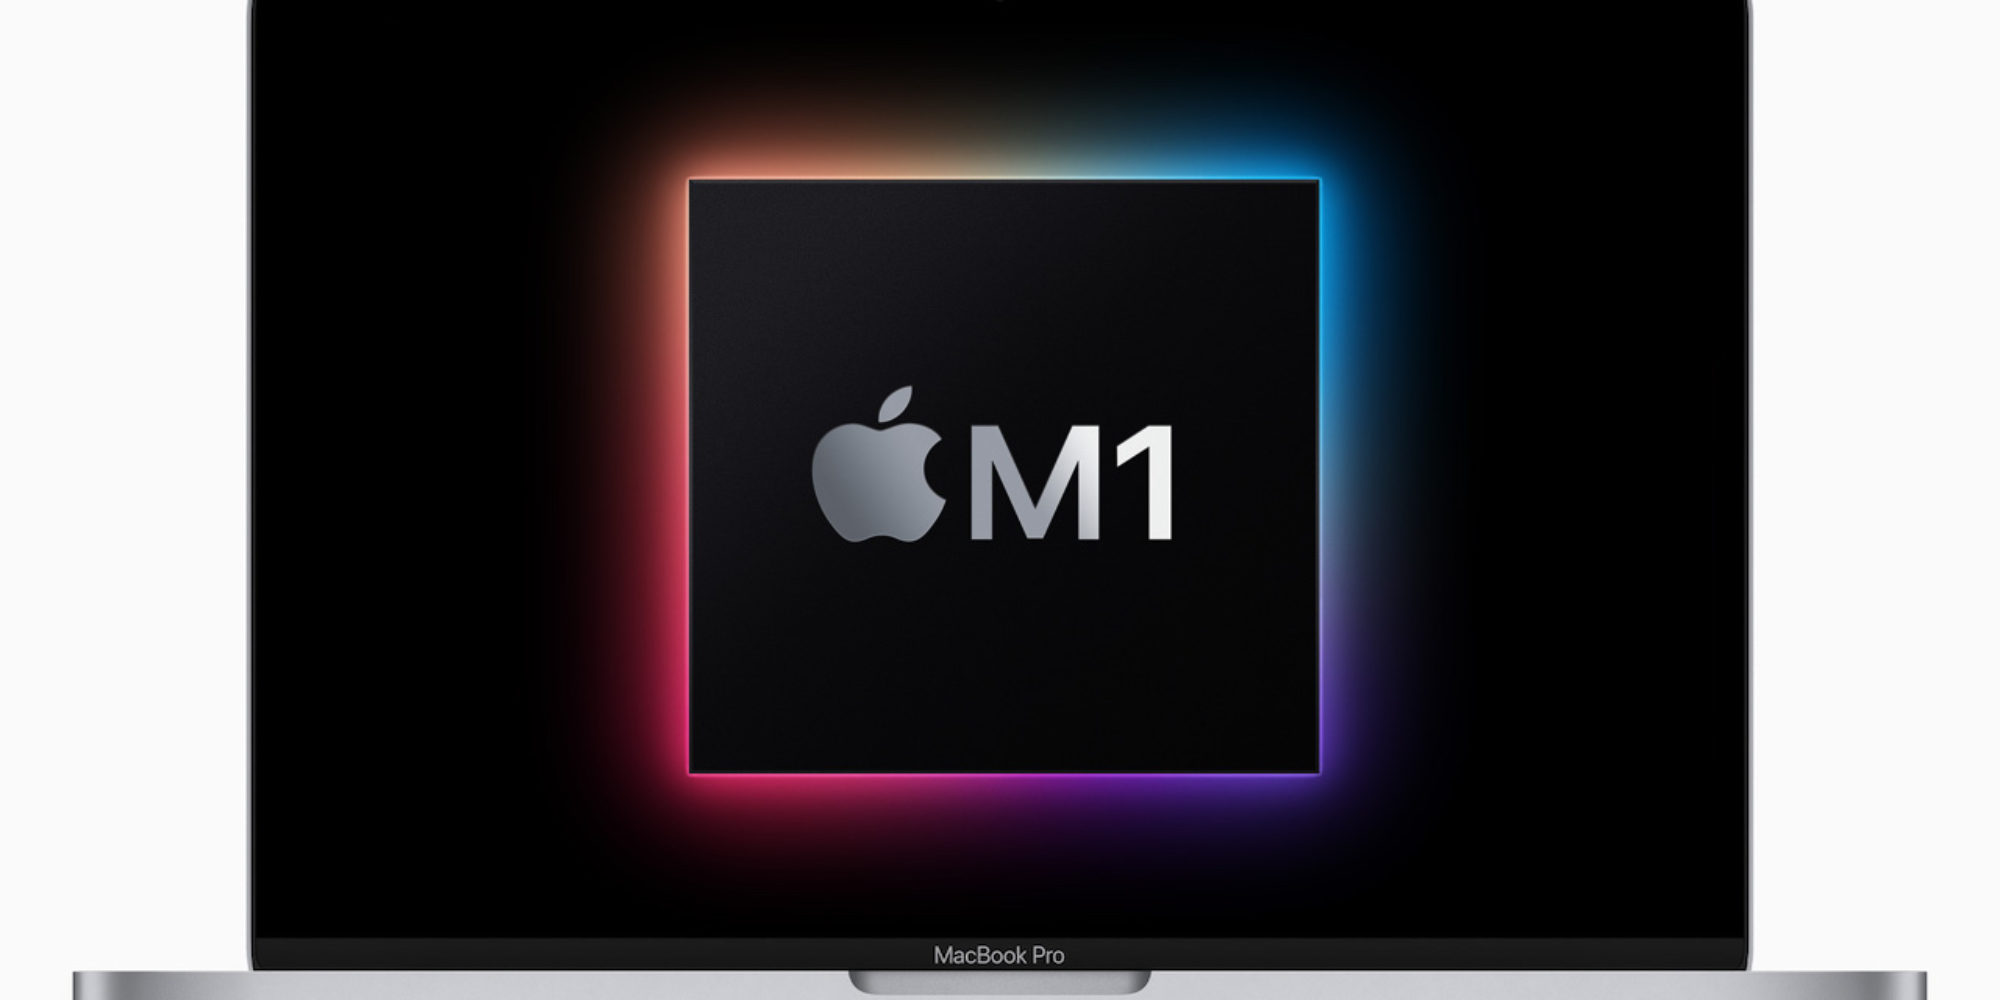 M1-Based Macs Have New Startup Modes: Here’s What You Need to Know